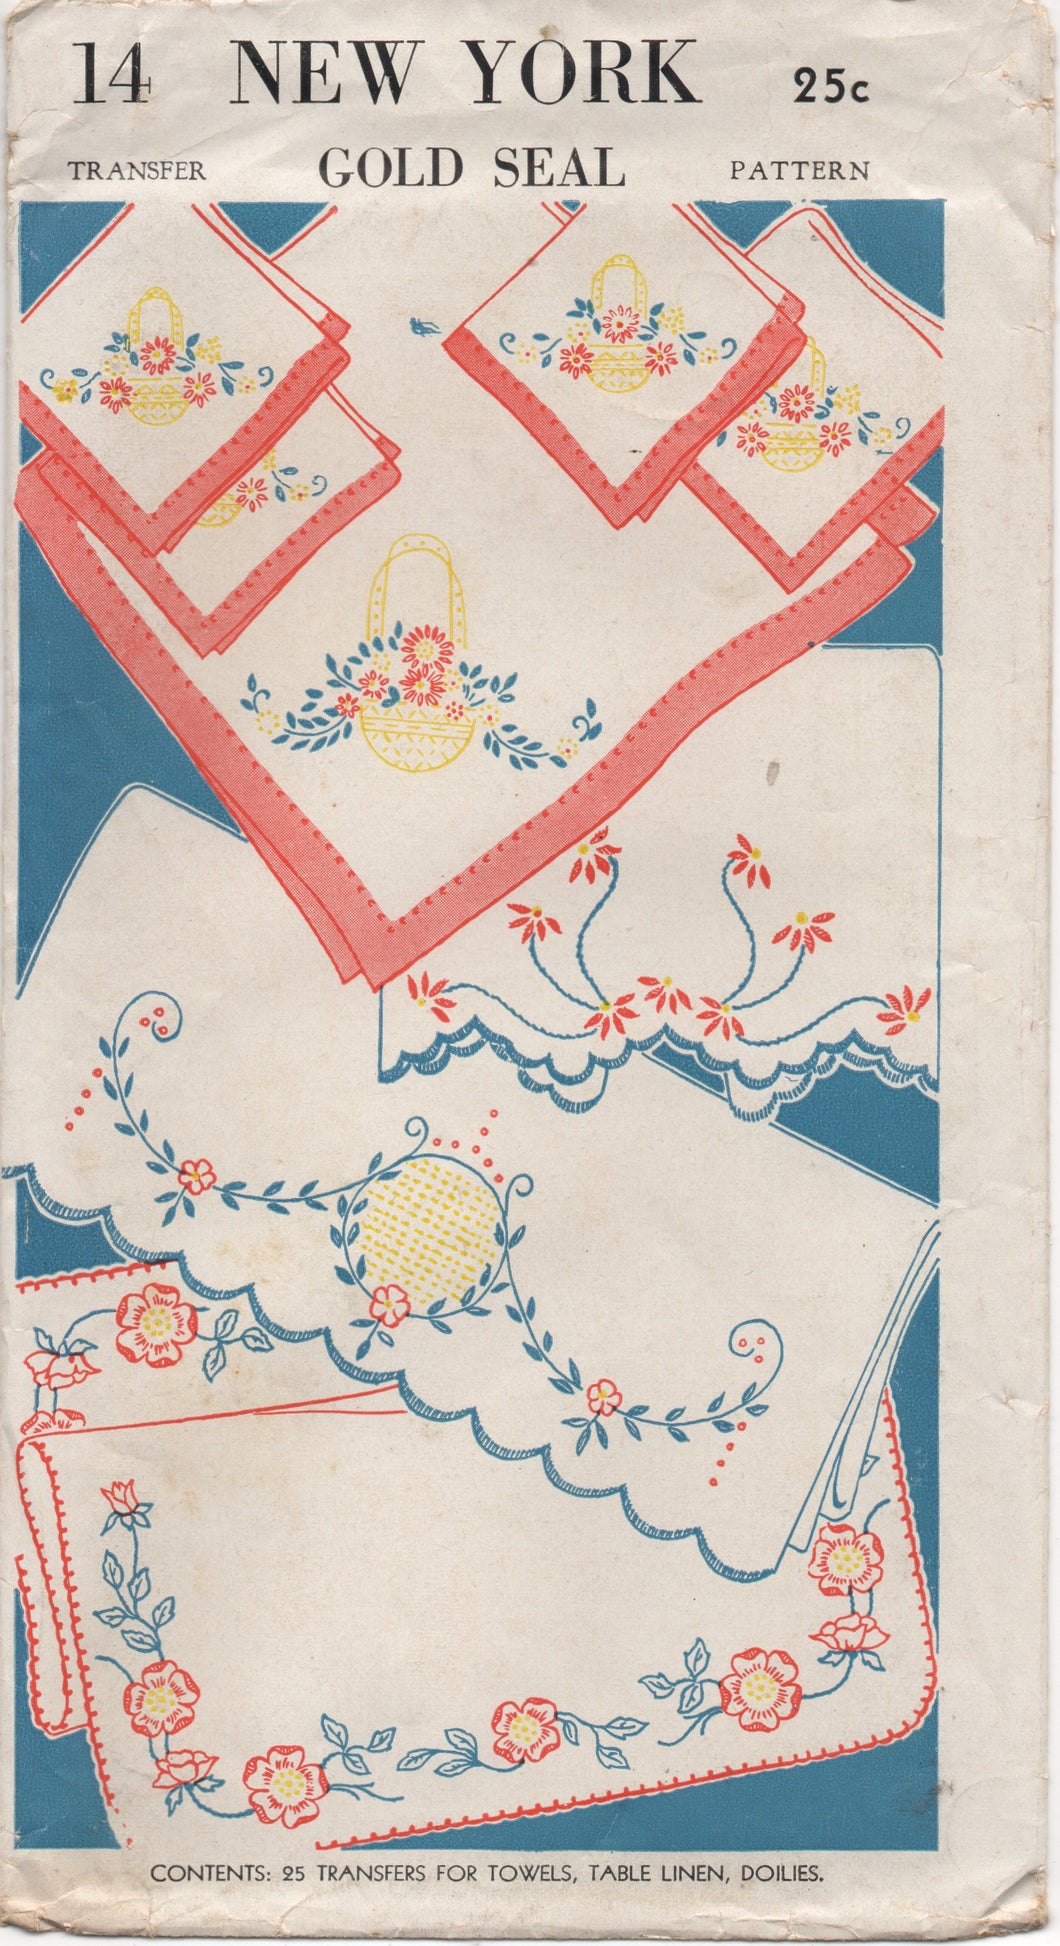 1940's New York Embroidery transfers for towels and linens - No. 14